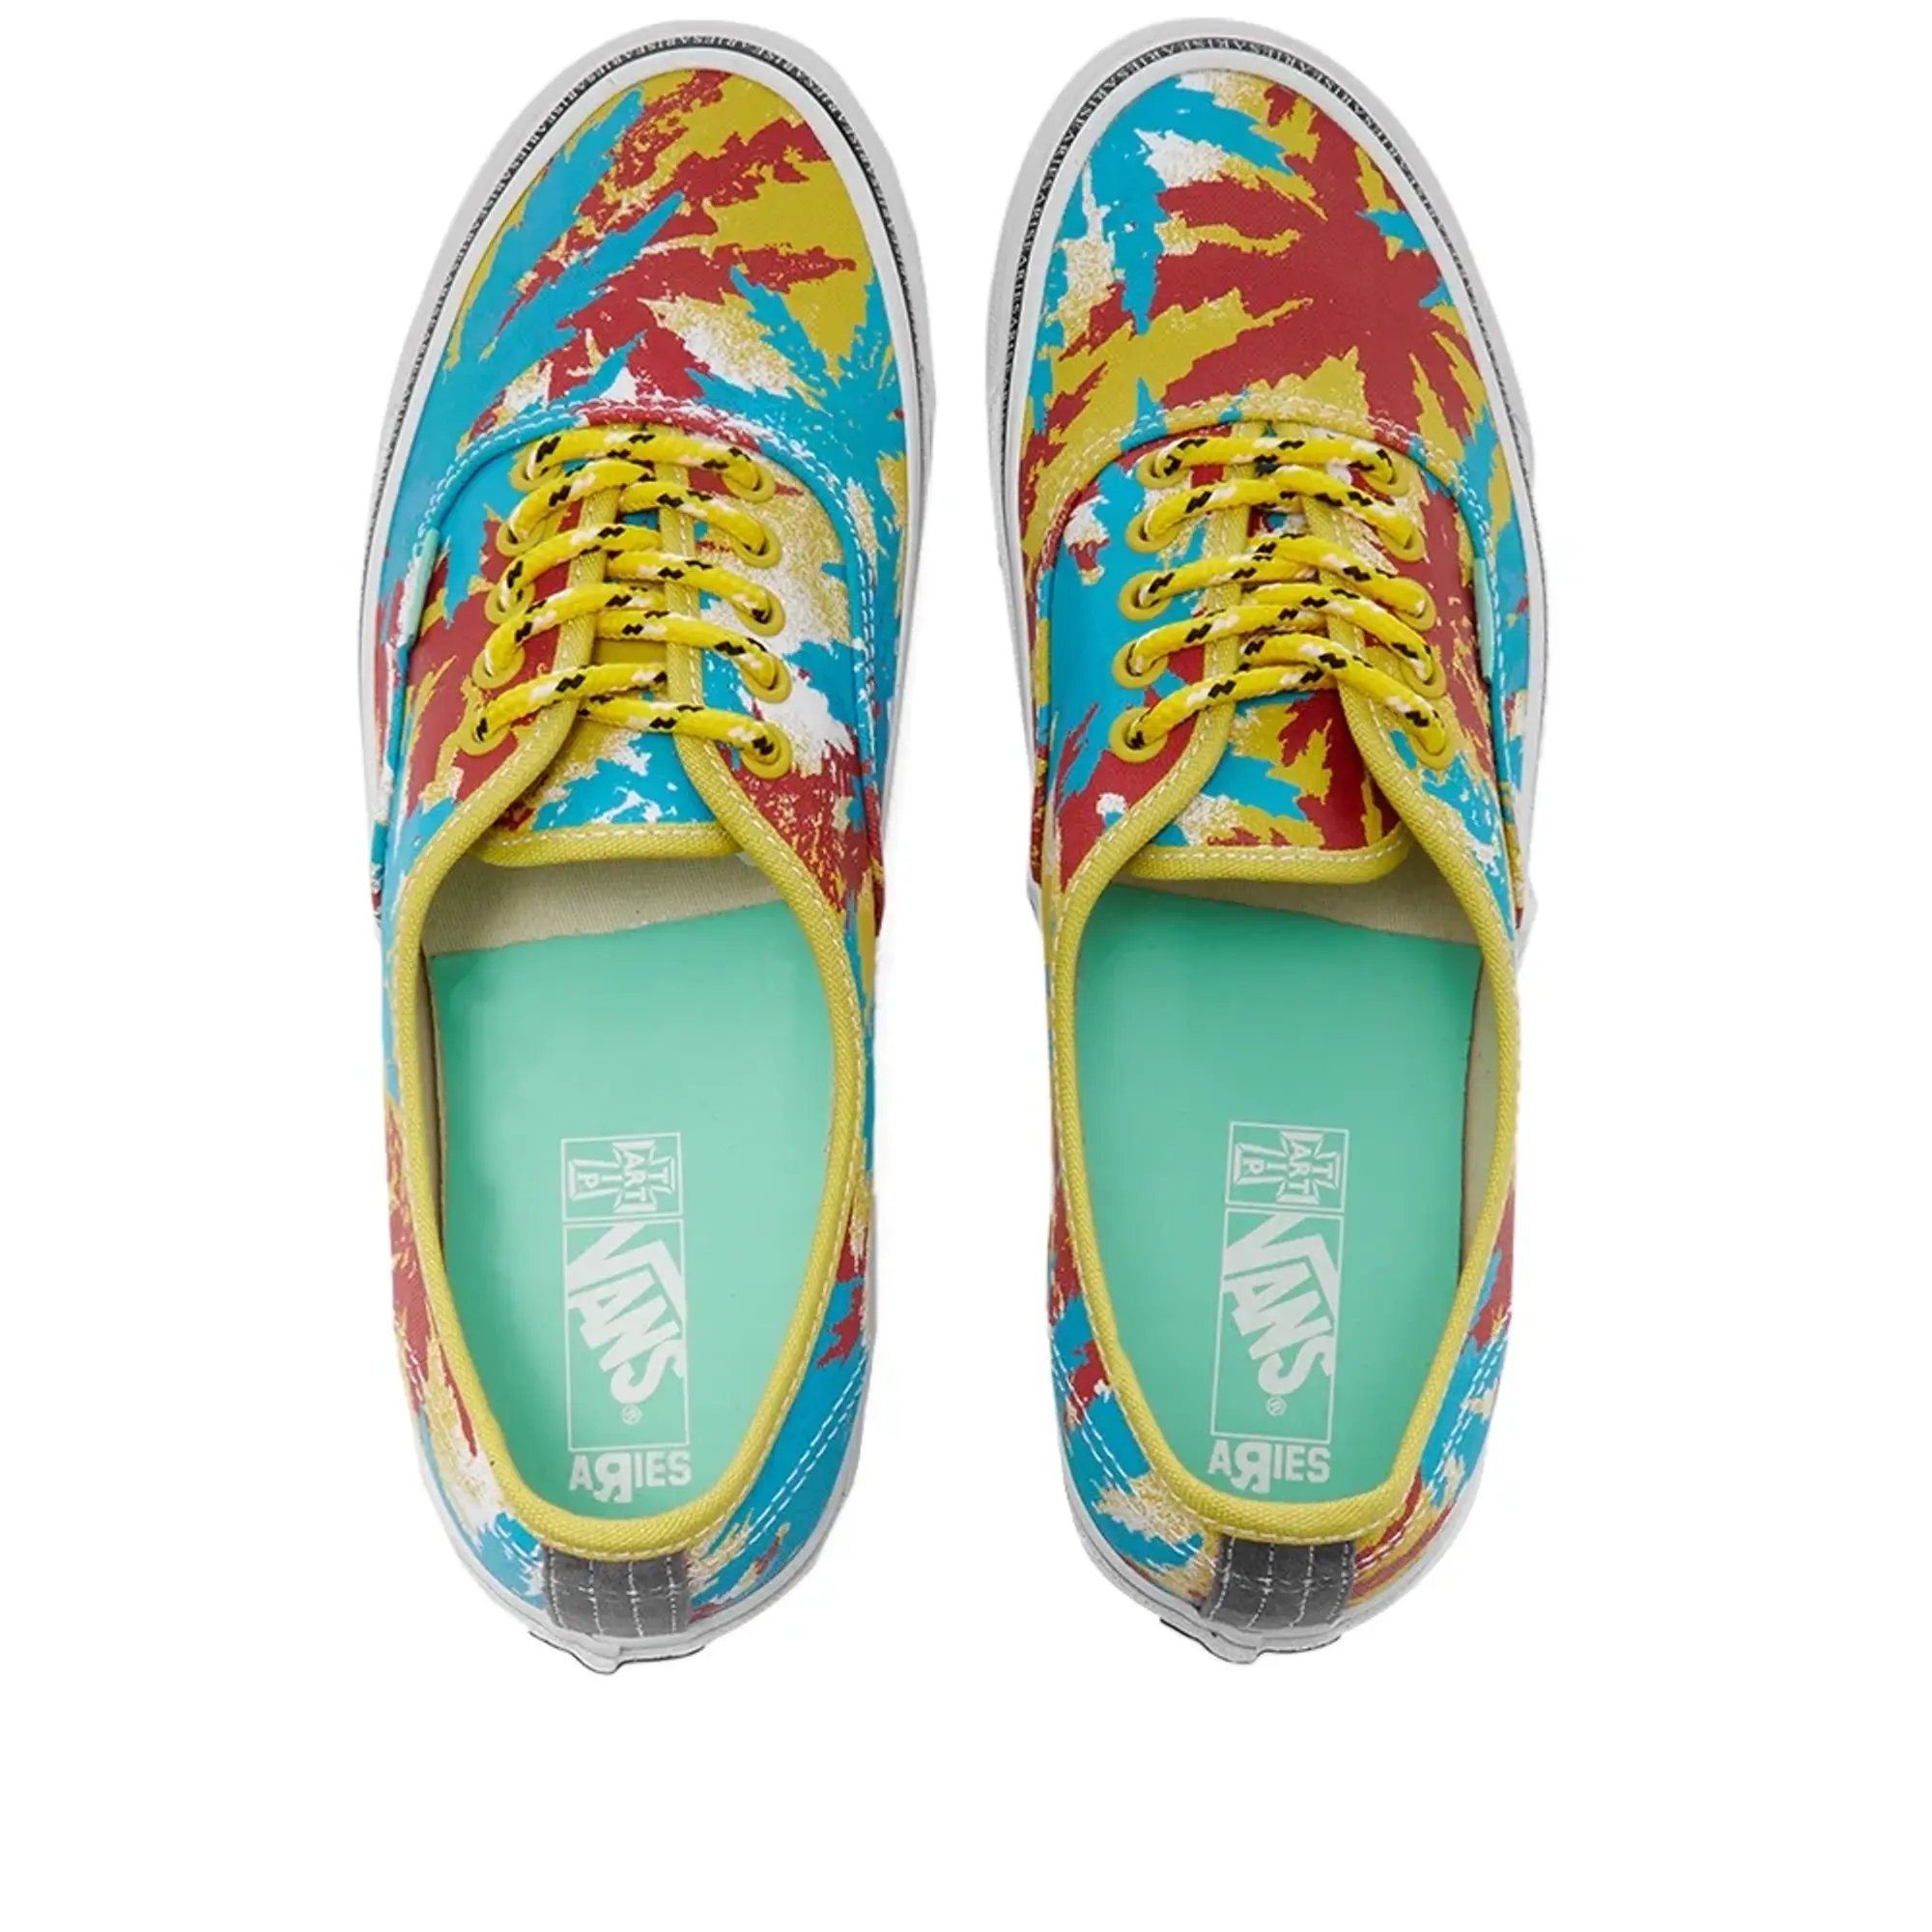 Men's Vault by Vans x Aries Authentic LX, Cleaning Product